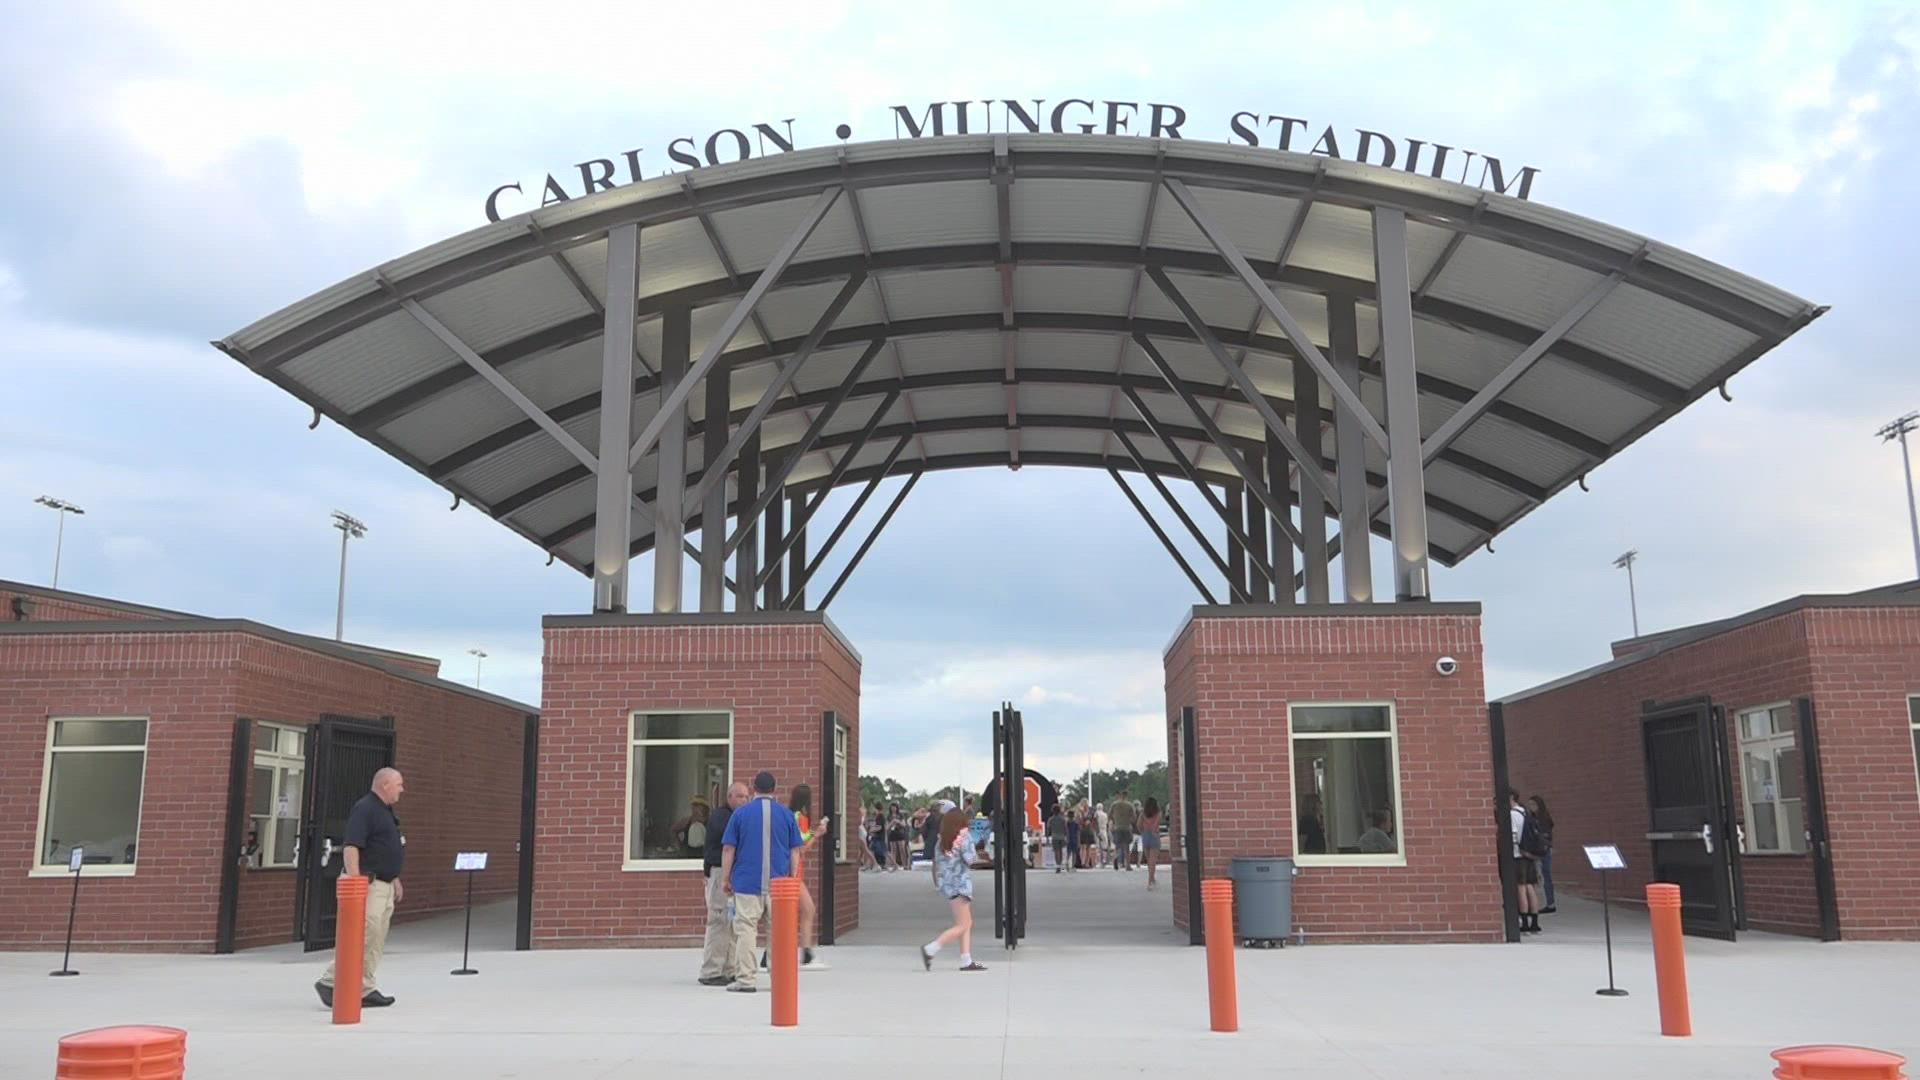 The previously named Ted Carlson Memorial Stadium is now the Carlson-Munger stadium, in honor of two men who exemplify “ram pride,” school officials say.